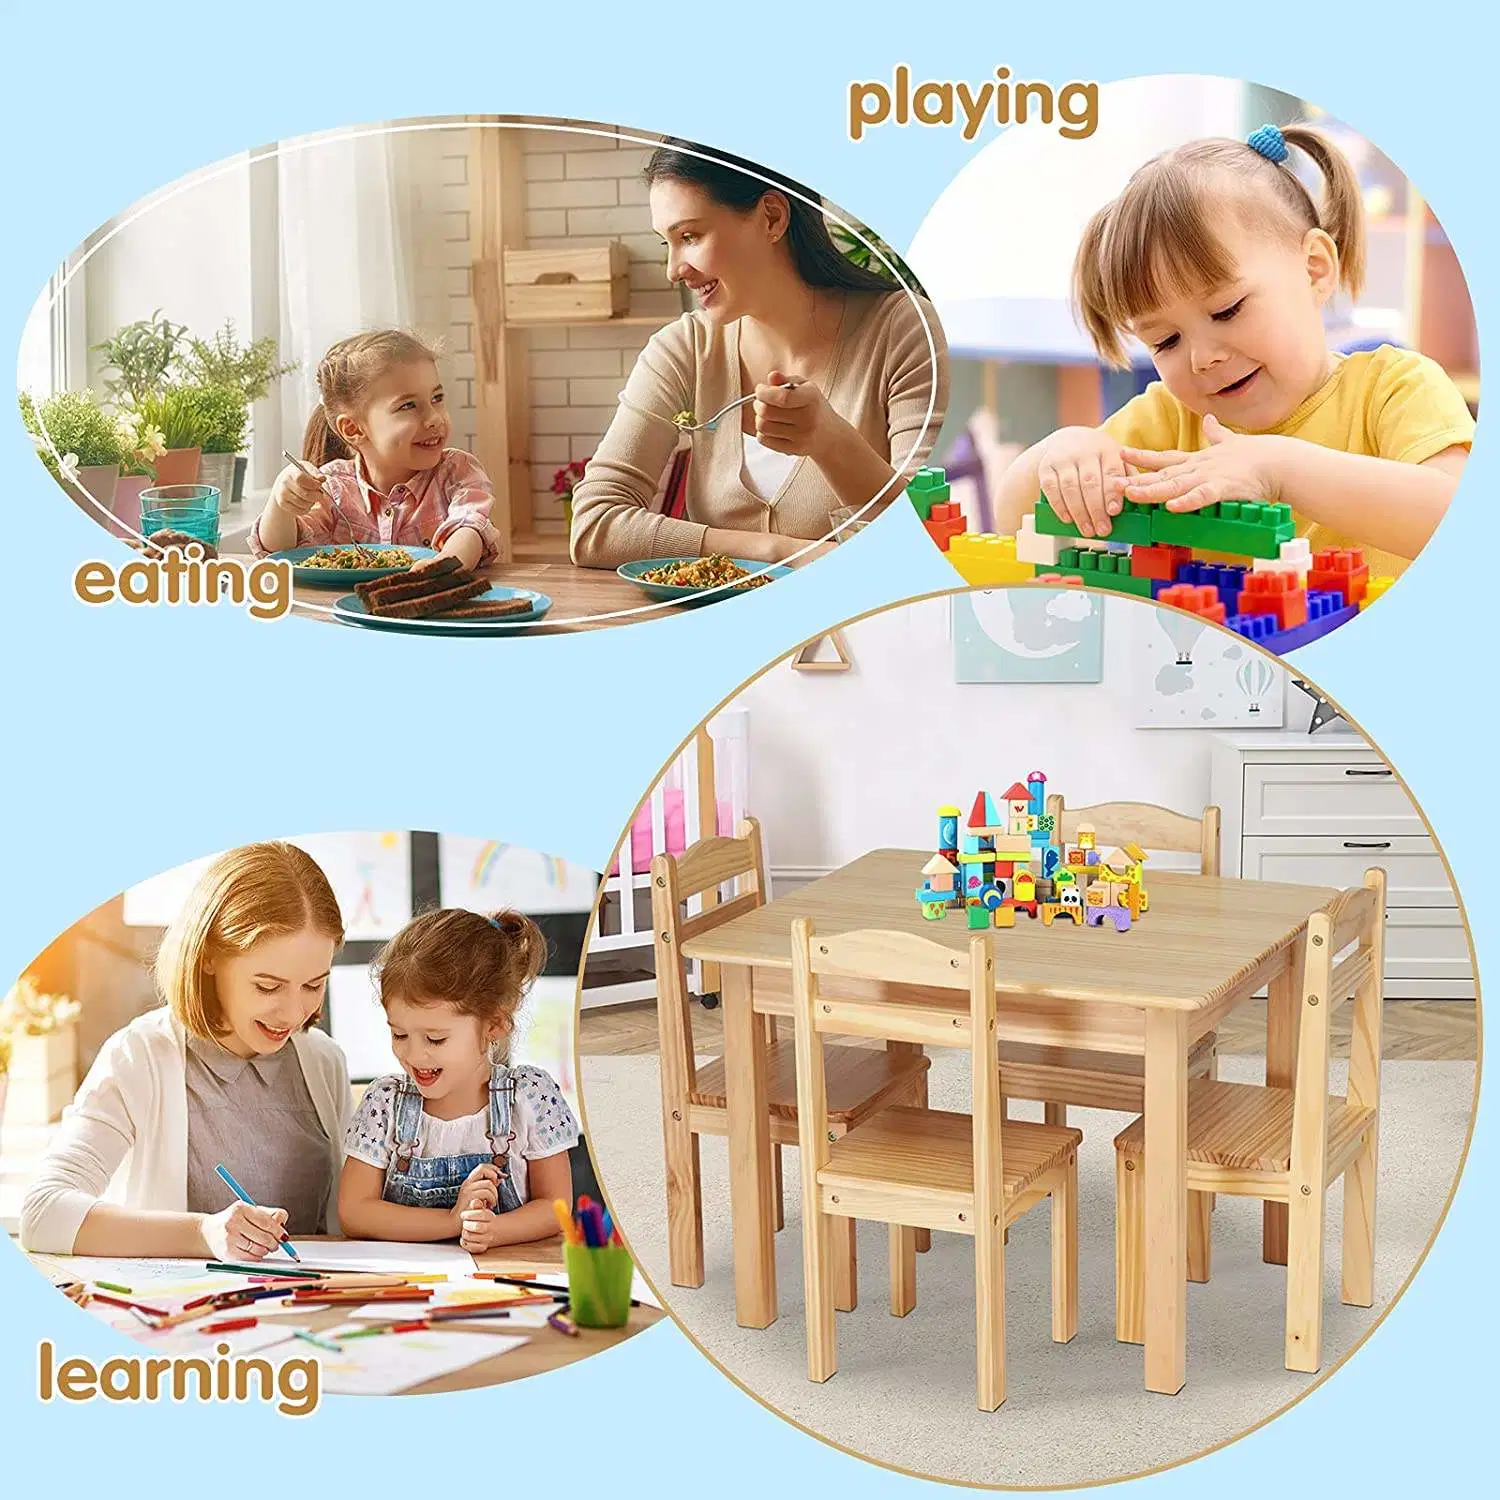 Kids Playroom Furniture Kindergarten Table Table and Chair Set